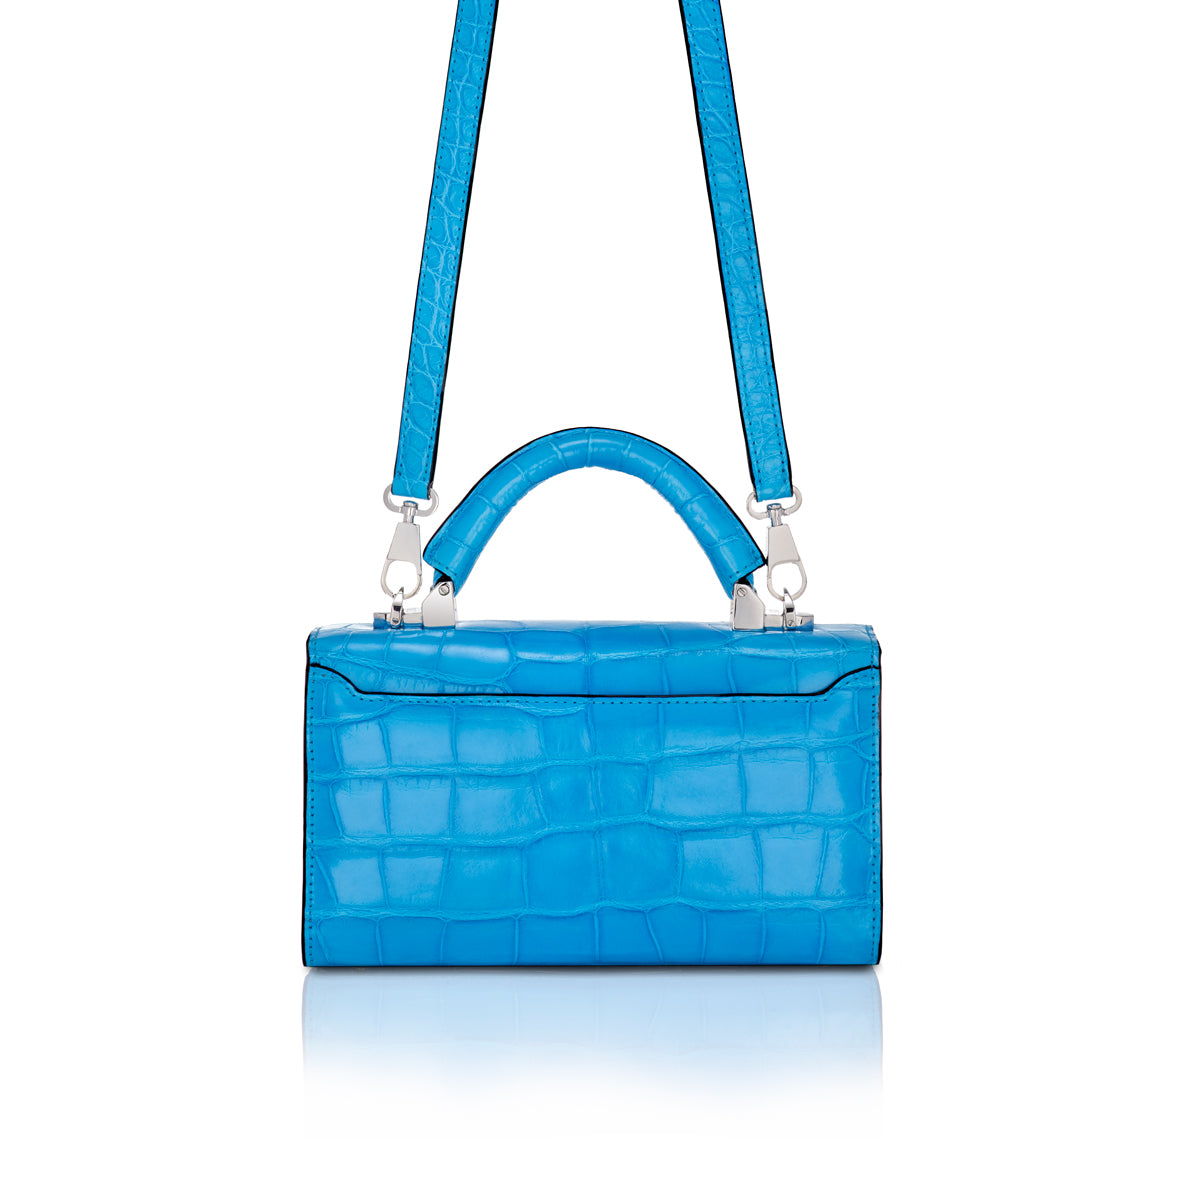 STALVEY Top Handle 2.0 Mini in Electric Blue Alligator with Palladium Hardware Front View